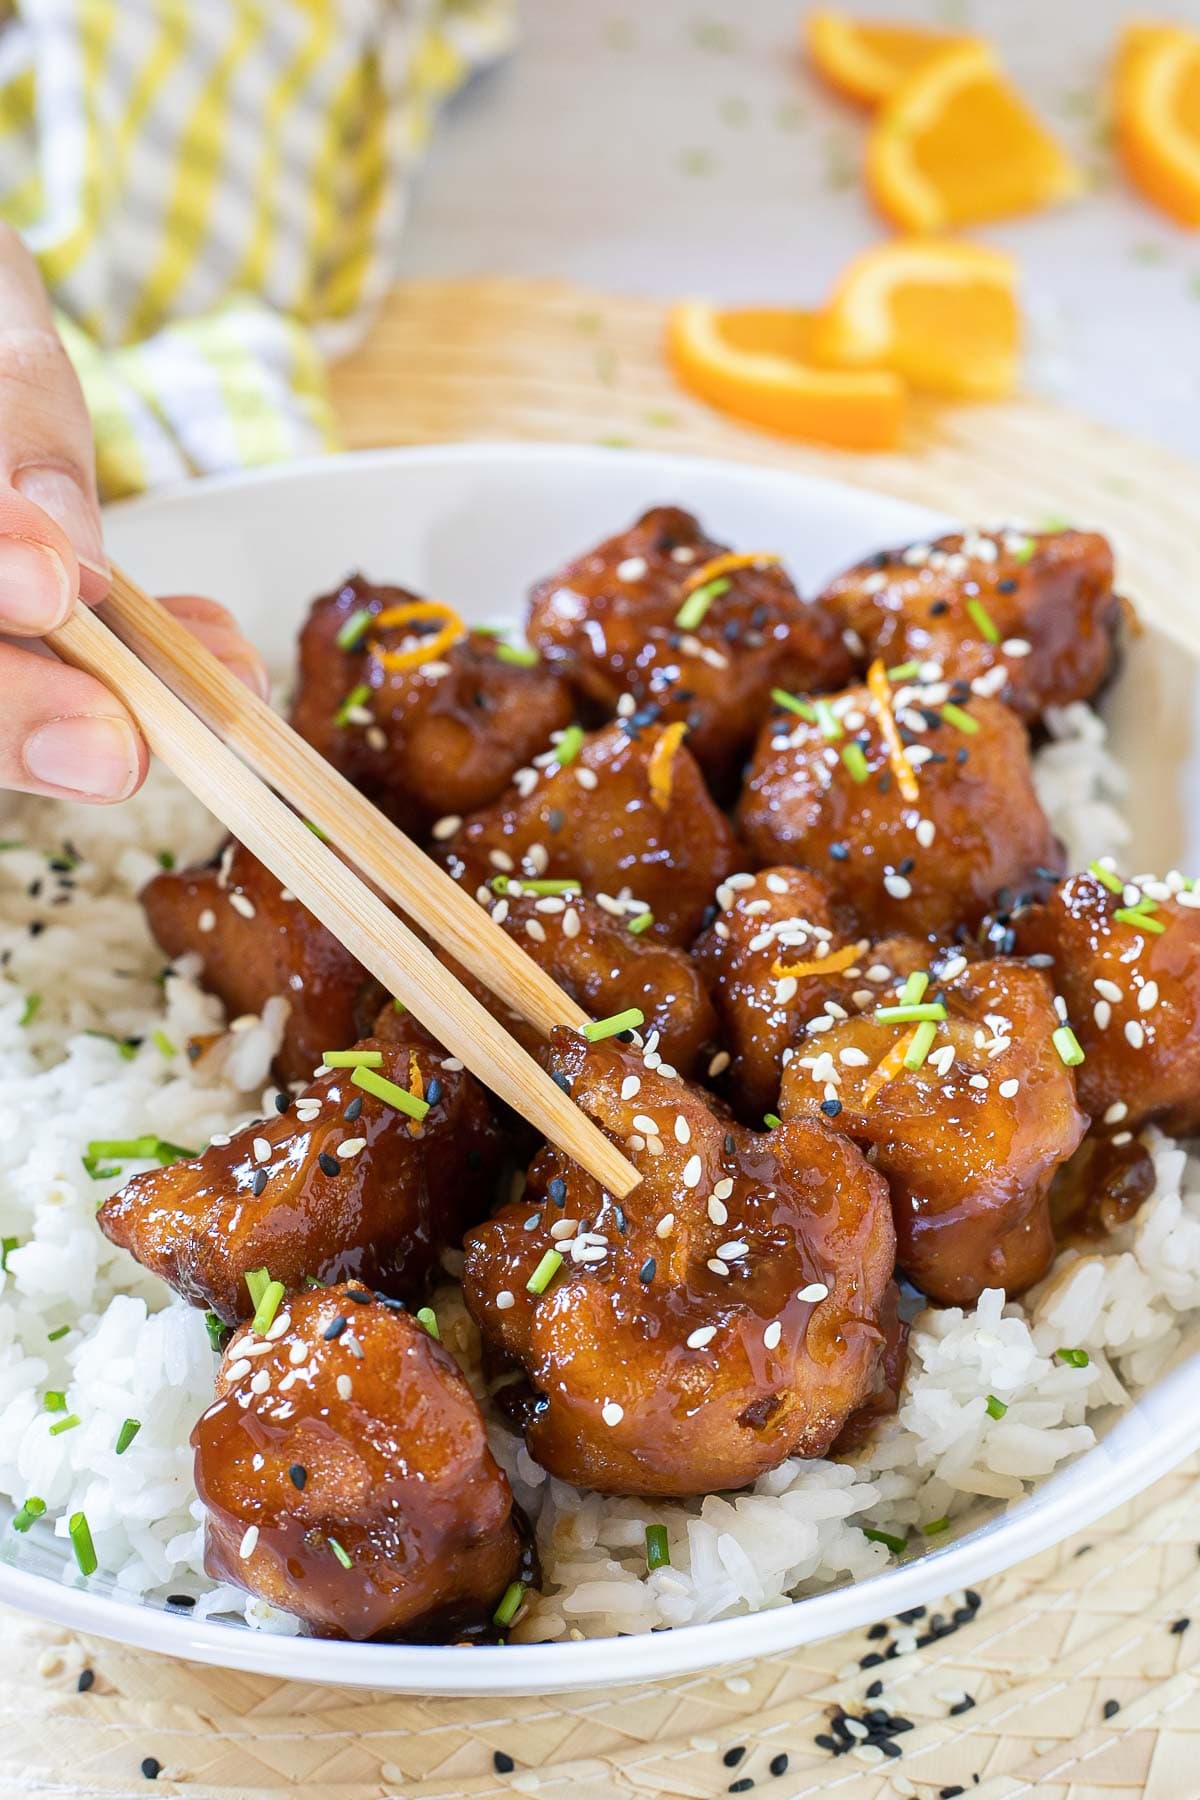 Sticky brown breaded cauliflower florets are served on top of rice in a white bowl. It is sprinkled with chopped chives and sesame seeds. A hand is holding chopsticks to take one.